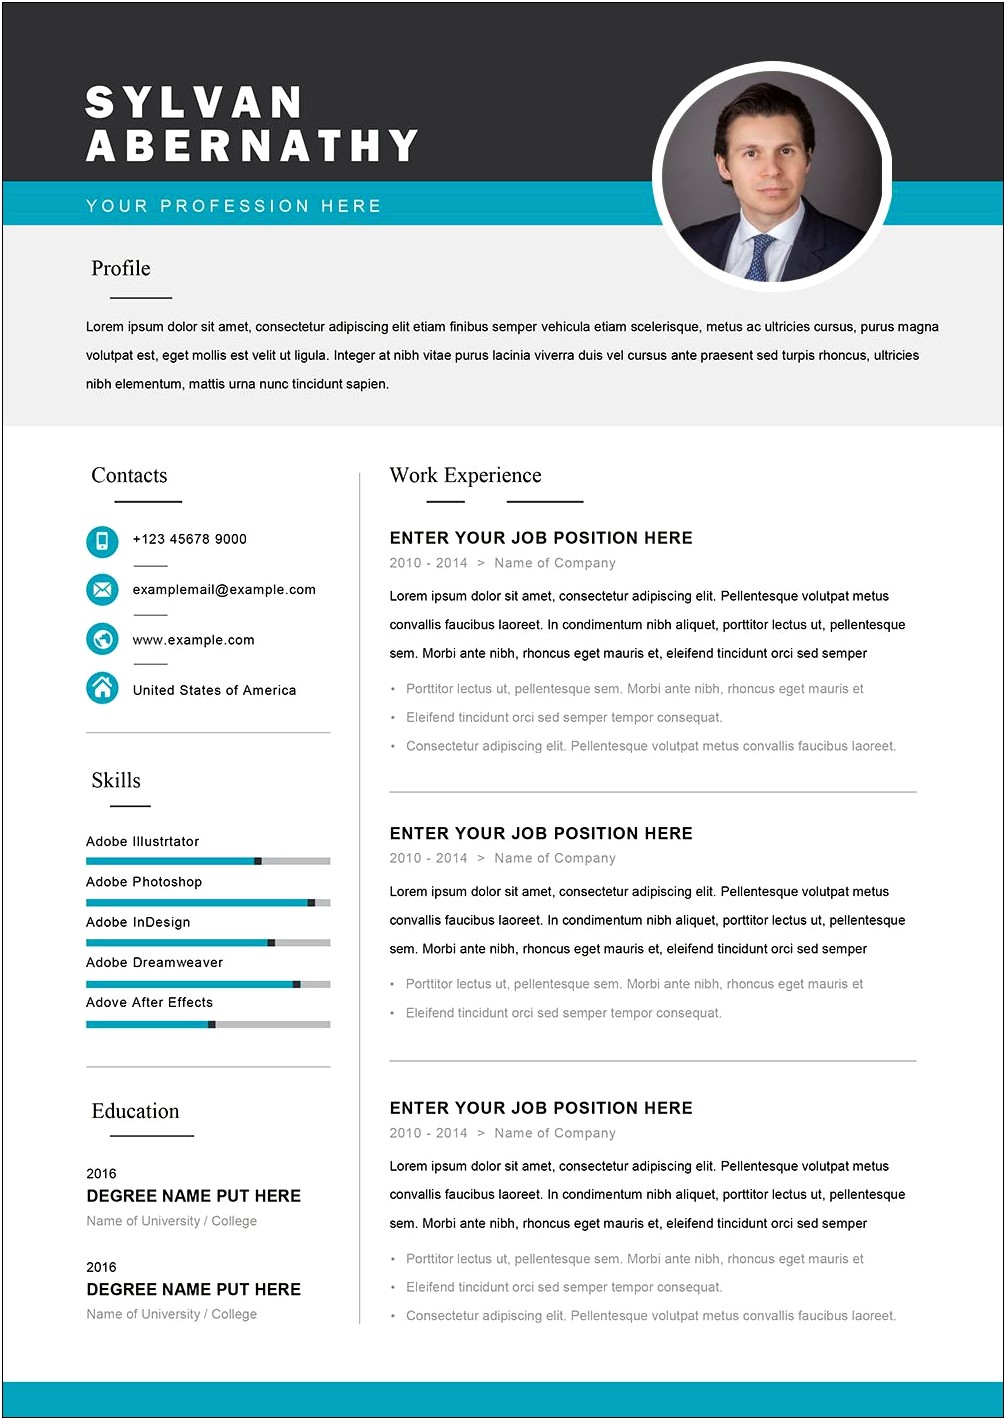 Adobe After Effects Resume Template Free Download